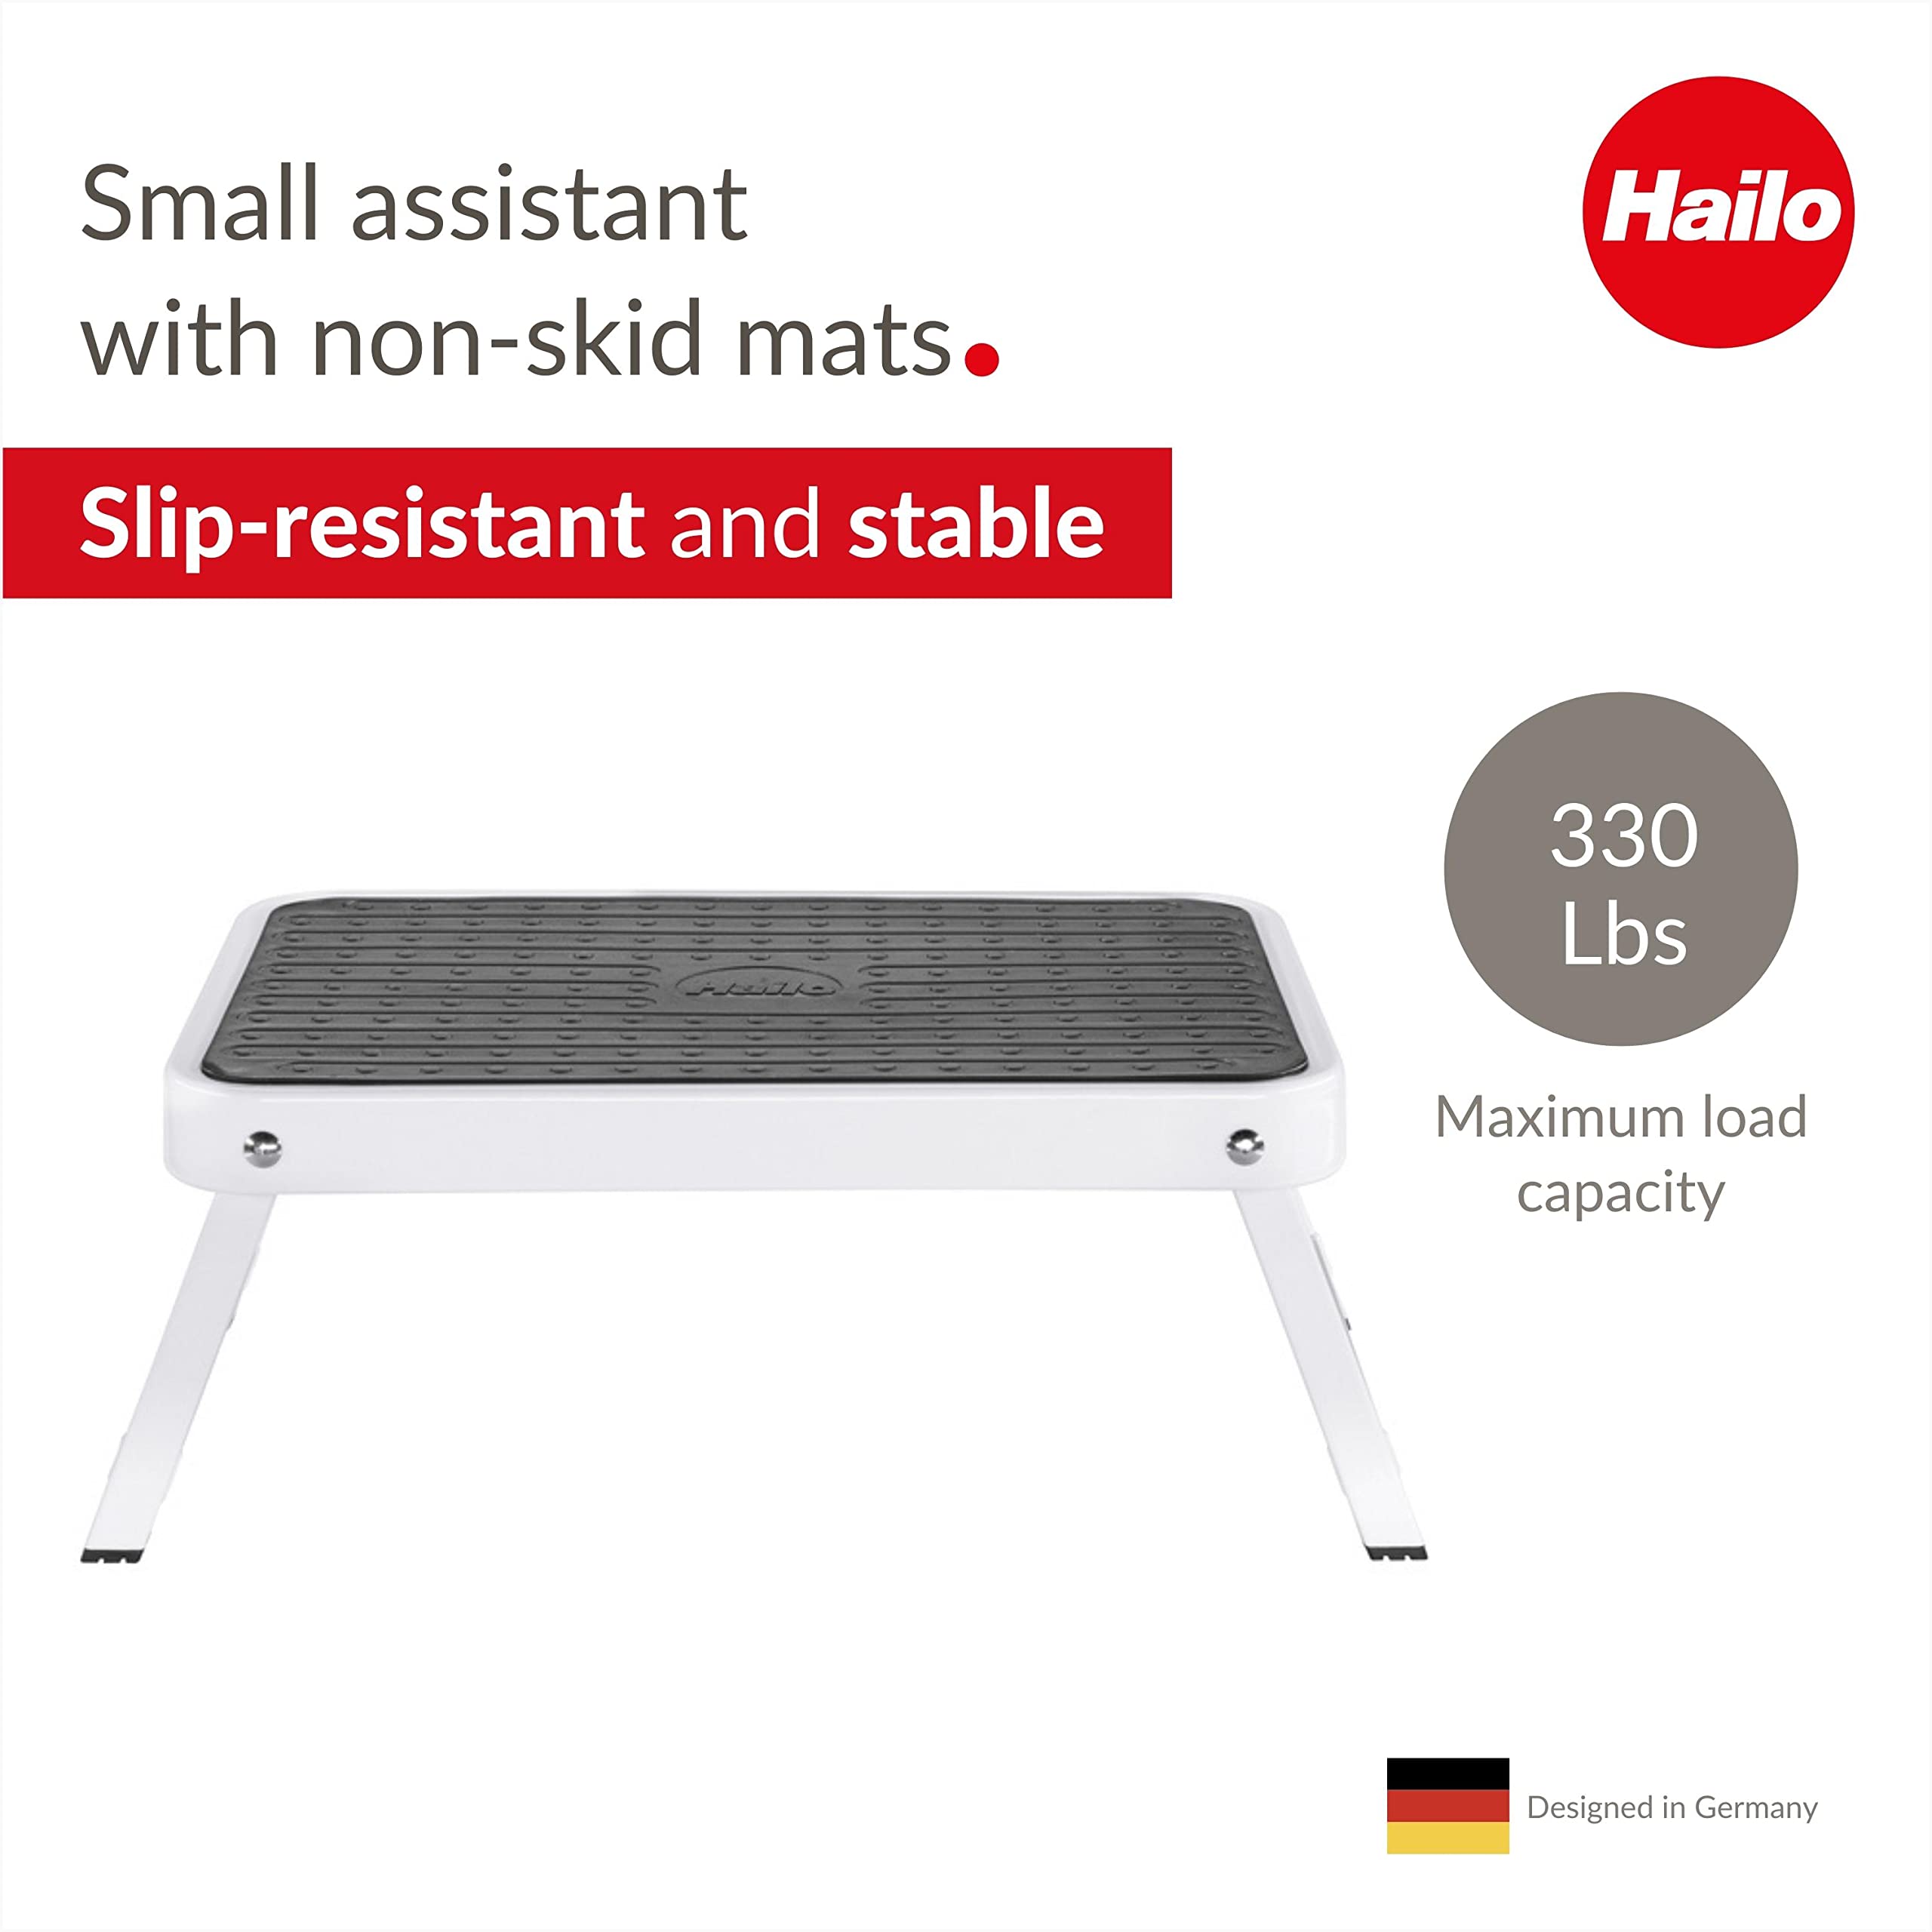 Hailo OneStep | Steel step | One large step with non-skid mat | Folding safety mechanism with unlocking button | Easy storage | Lightweight | White